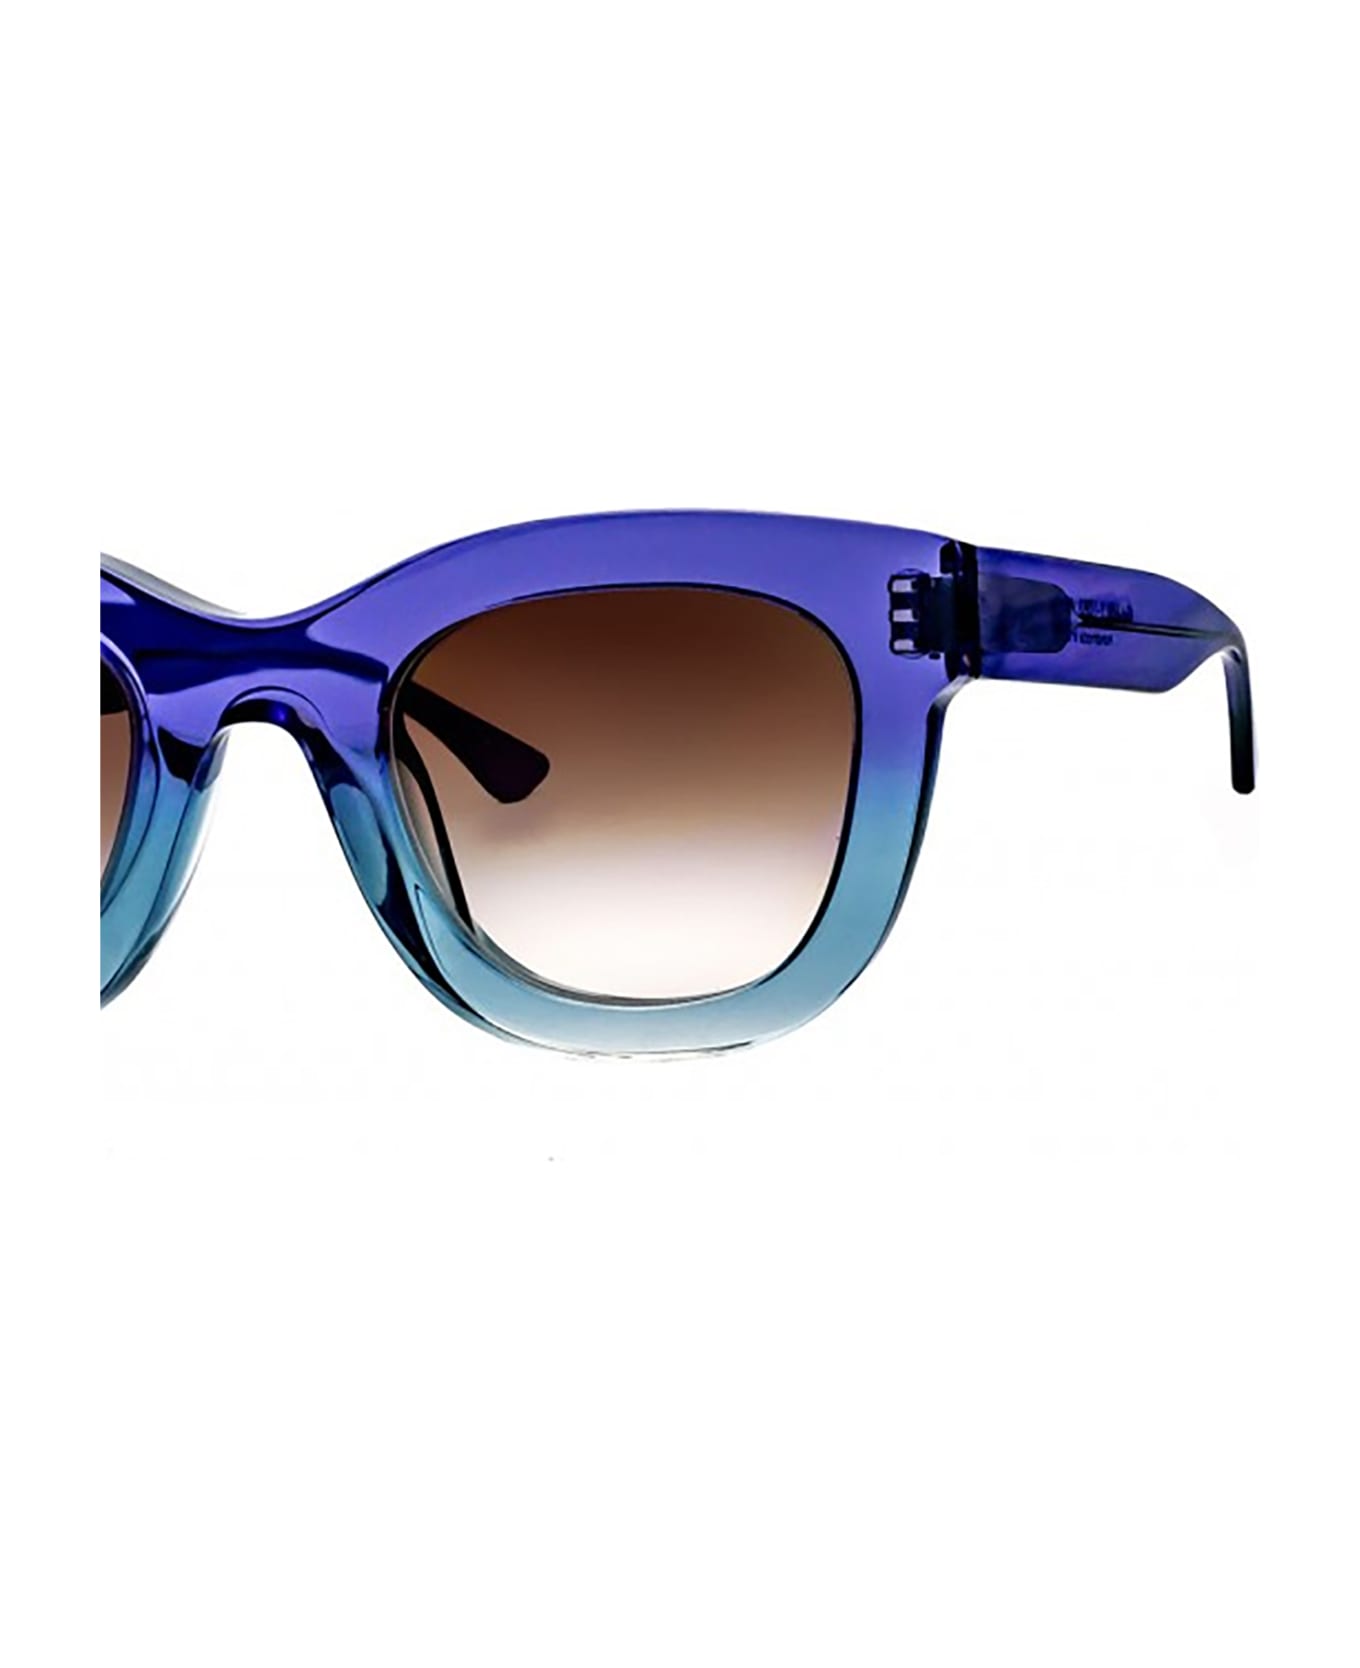 Thierry Lasry GAMBLY Sunglasses